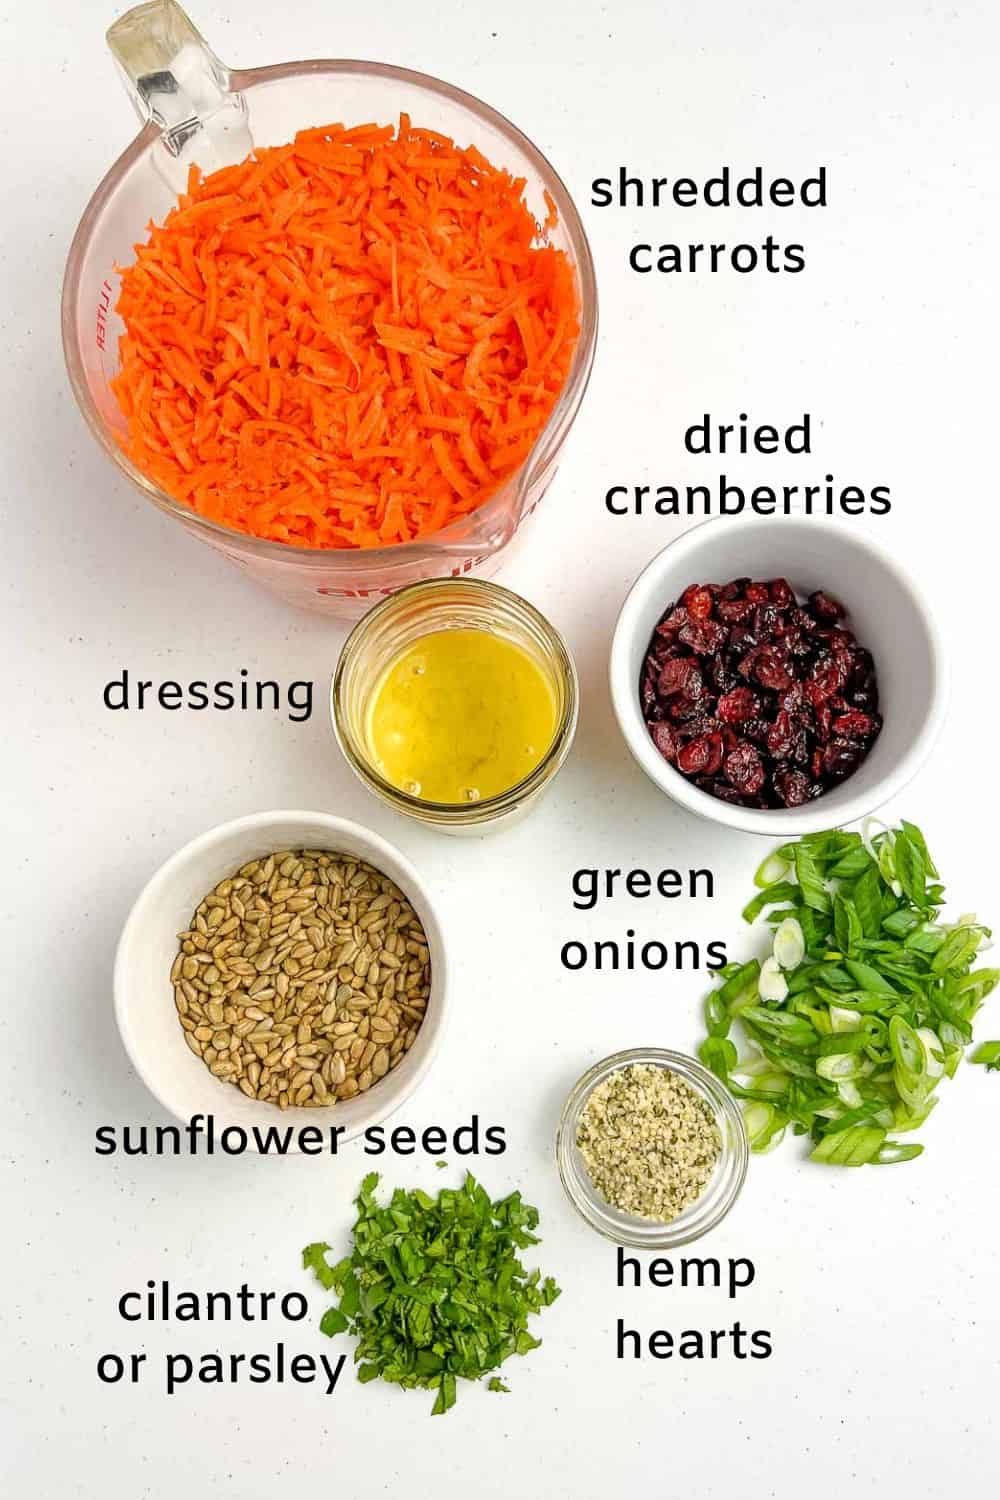 Labelled ingredients for carrot salad with honey-mustard dressing.